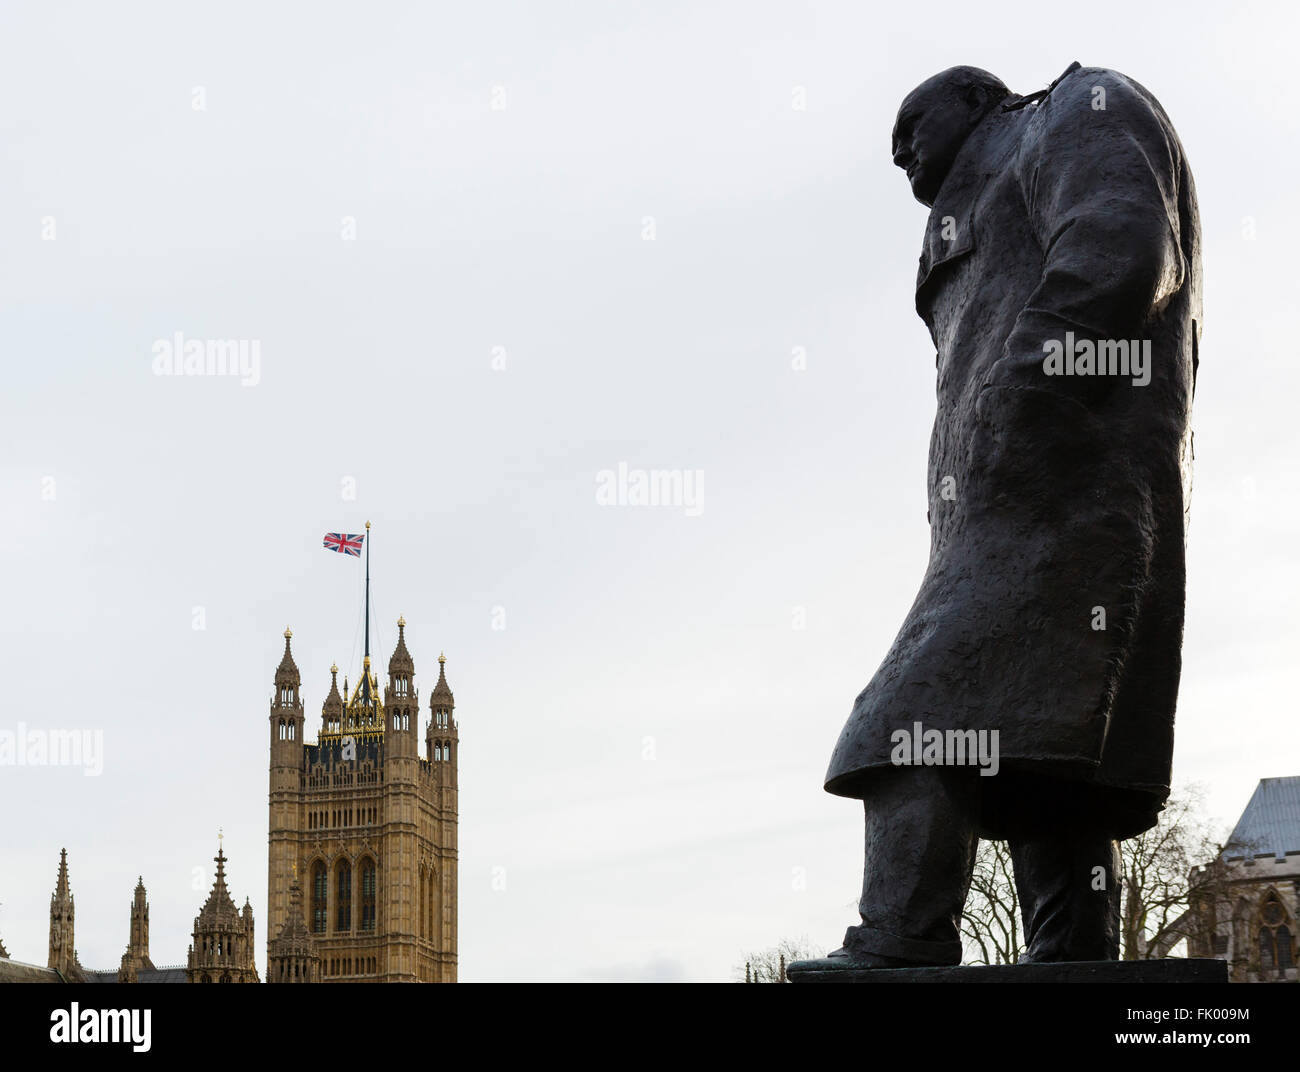 Statue of Sir Winston Churchill with the Palace of Westminster behind, Parliament Square, Westminster, London, England, UK Stock Photo